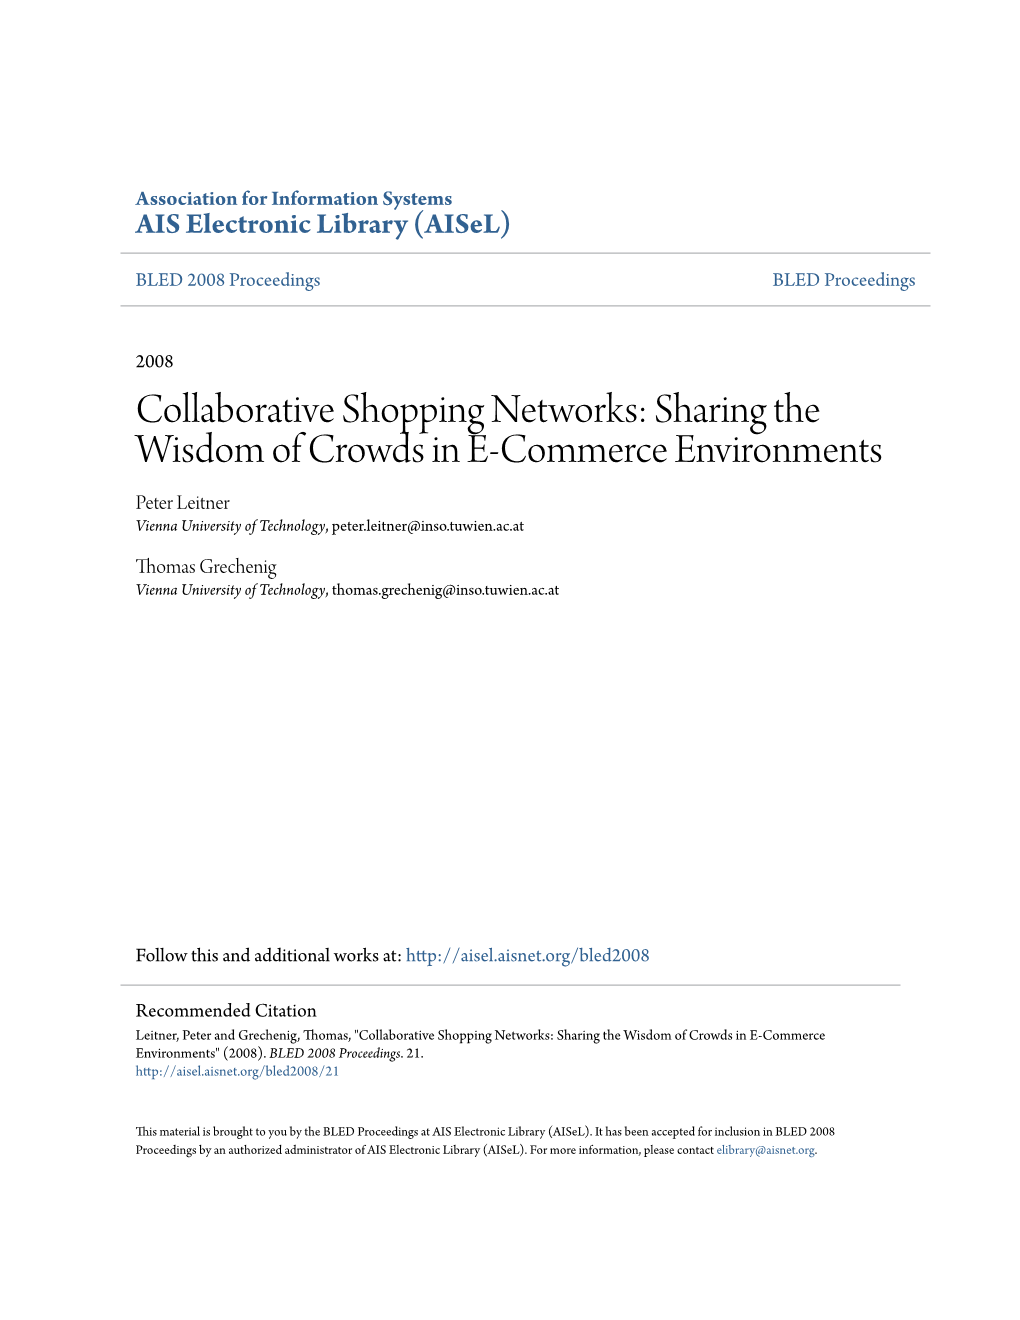 Collaborative Shopping Networks